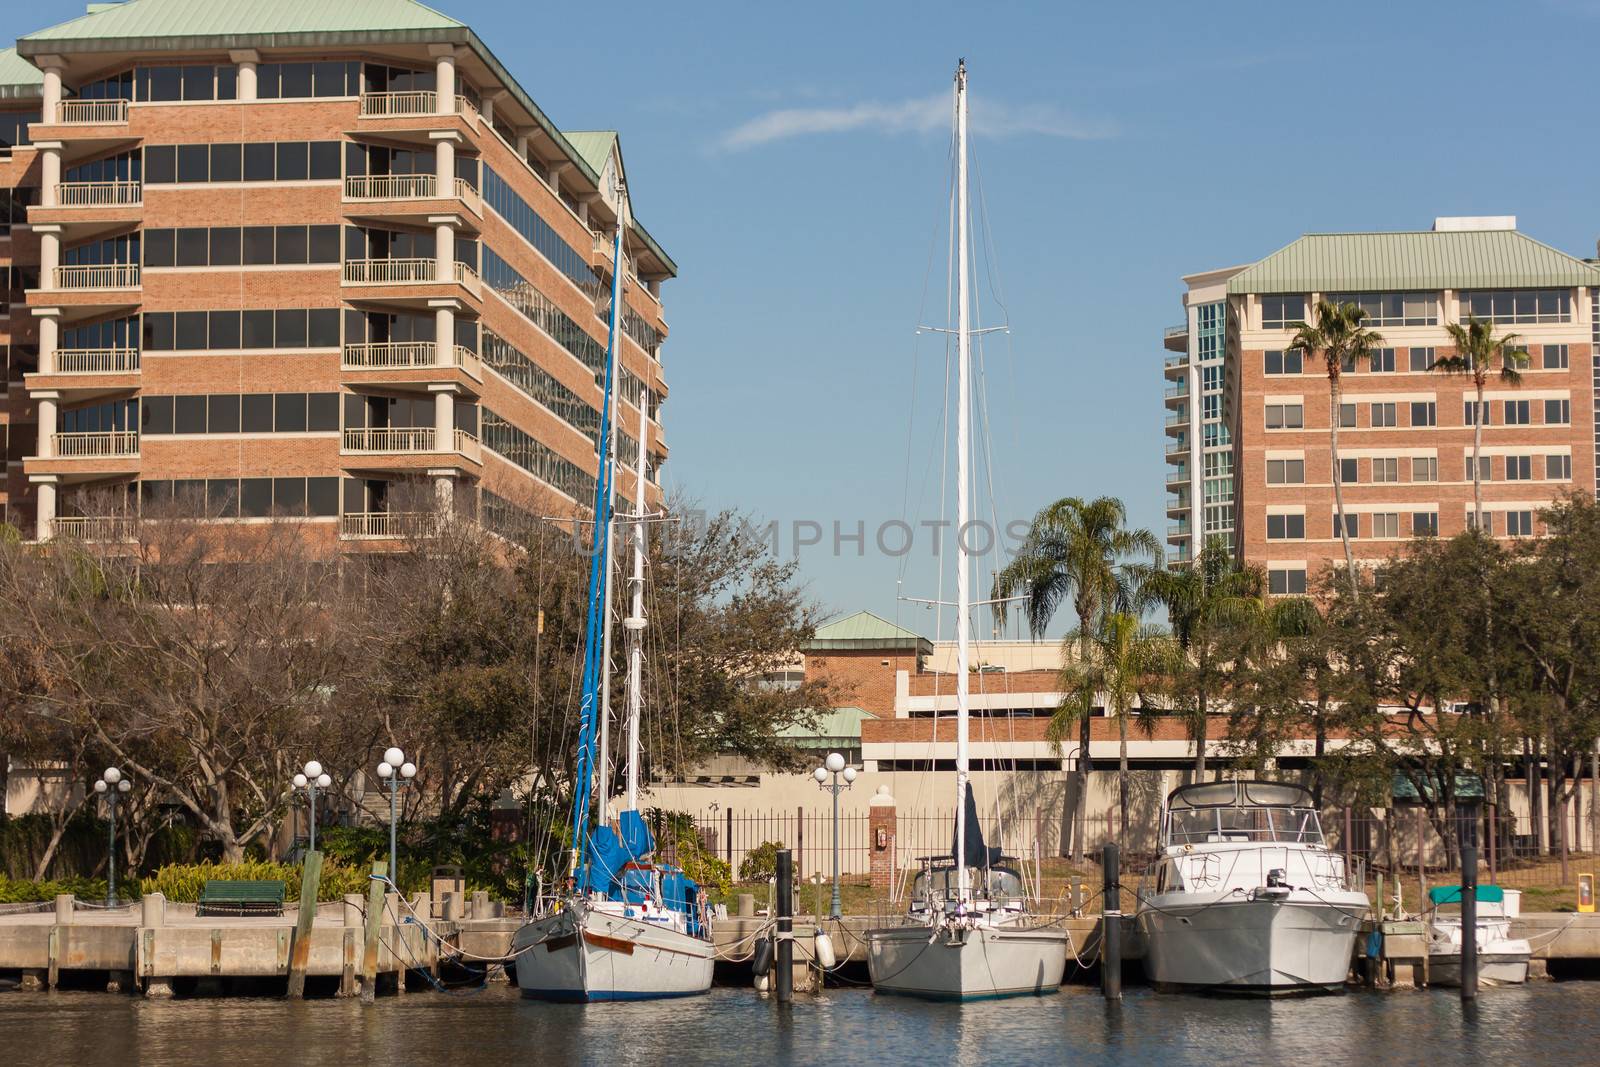 This was taken at Tampa, Florida on the Hillsborough River. This scene is an icon of fine Florida living. Just walk from your home to your boat and take off.